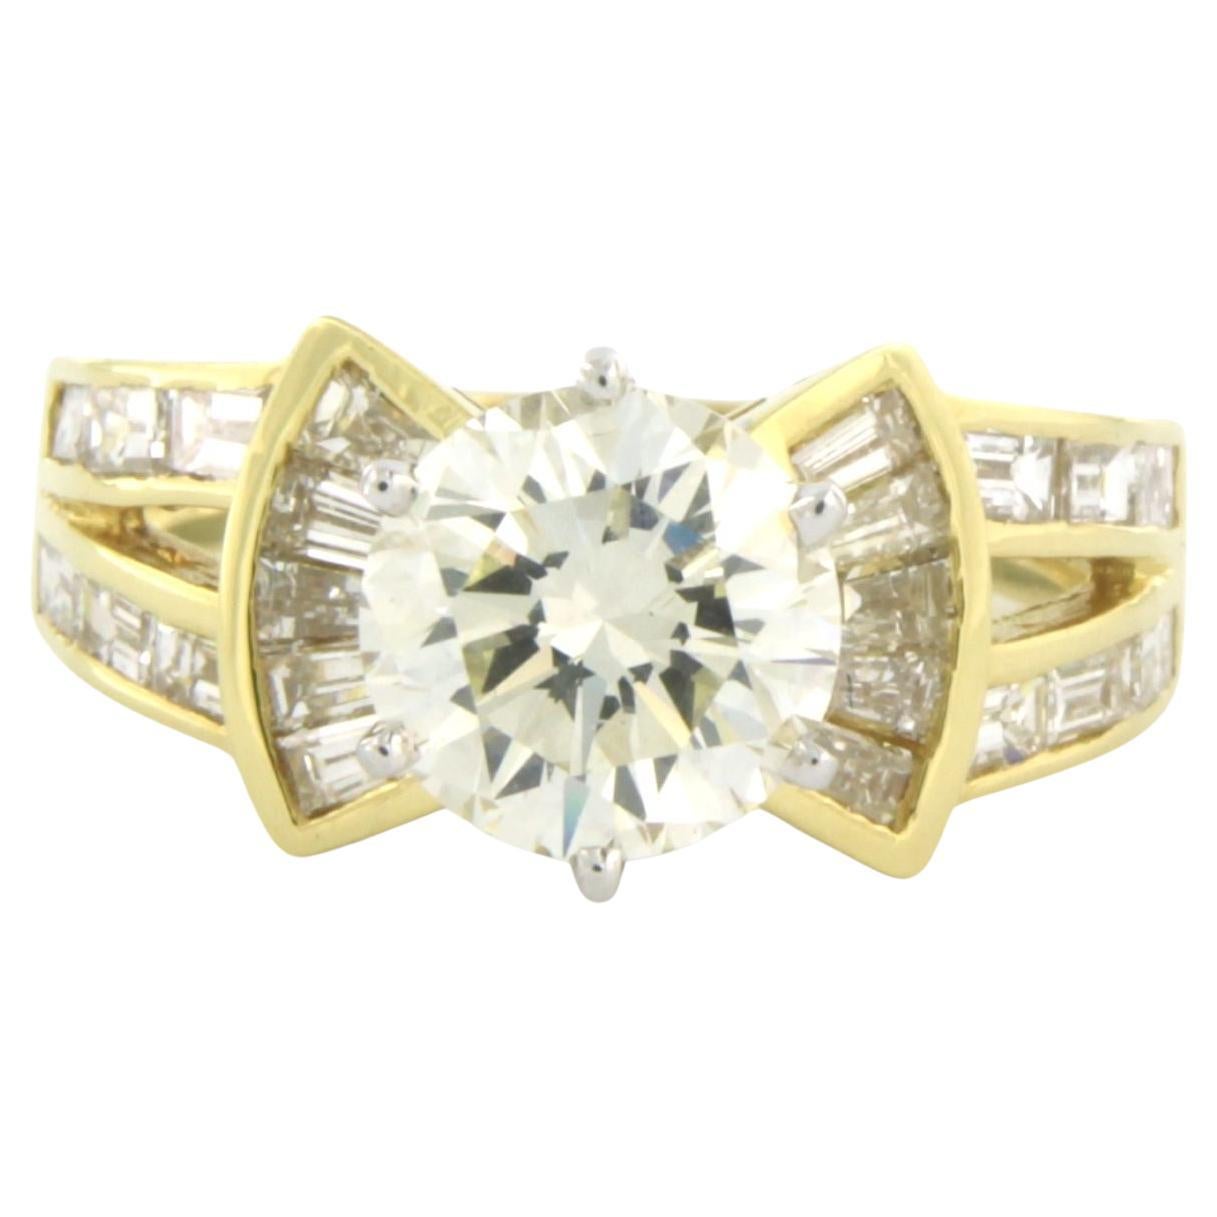 Center stone brilliant cut up to 2.20ct and diamonds up to 1.20ct 18k gold ring